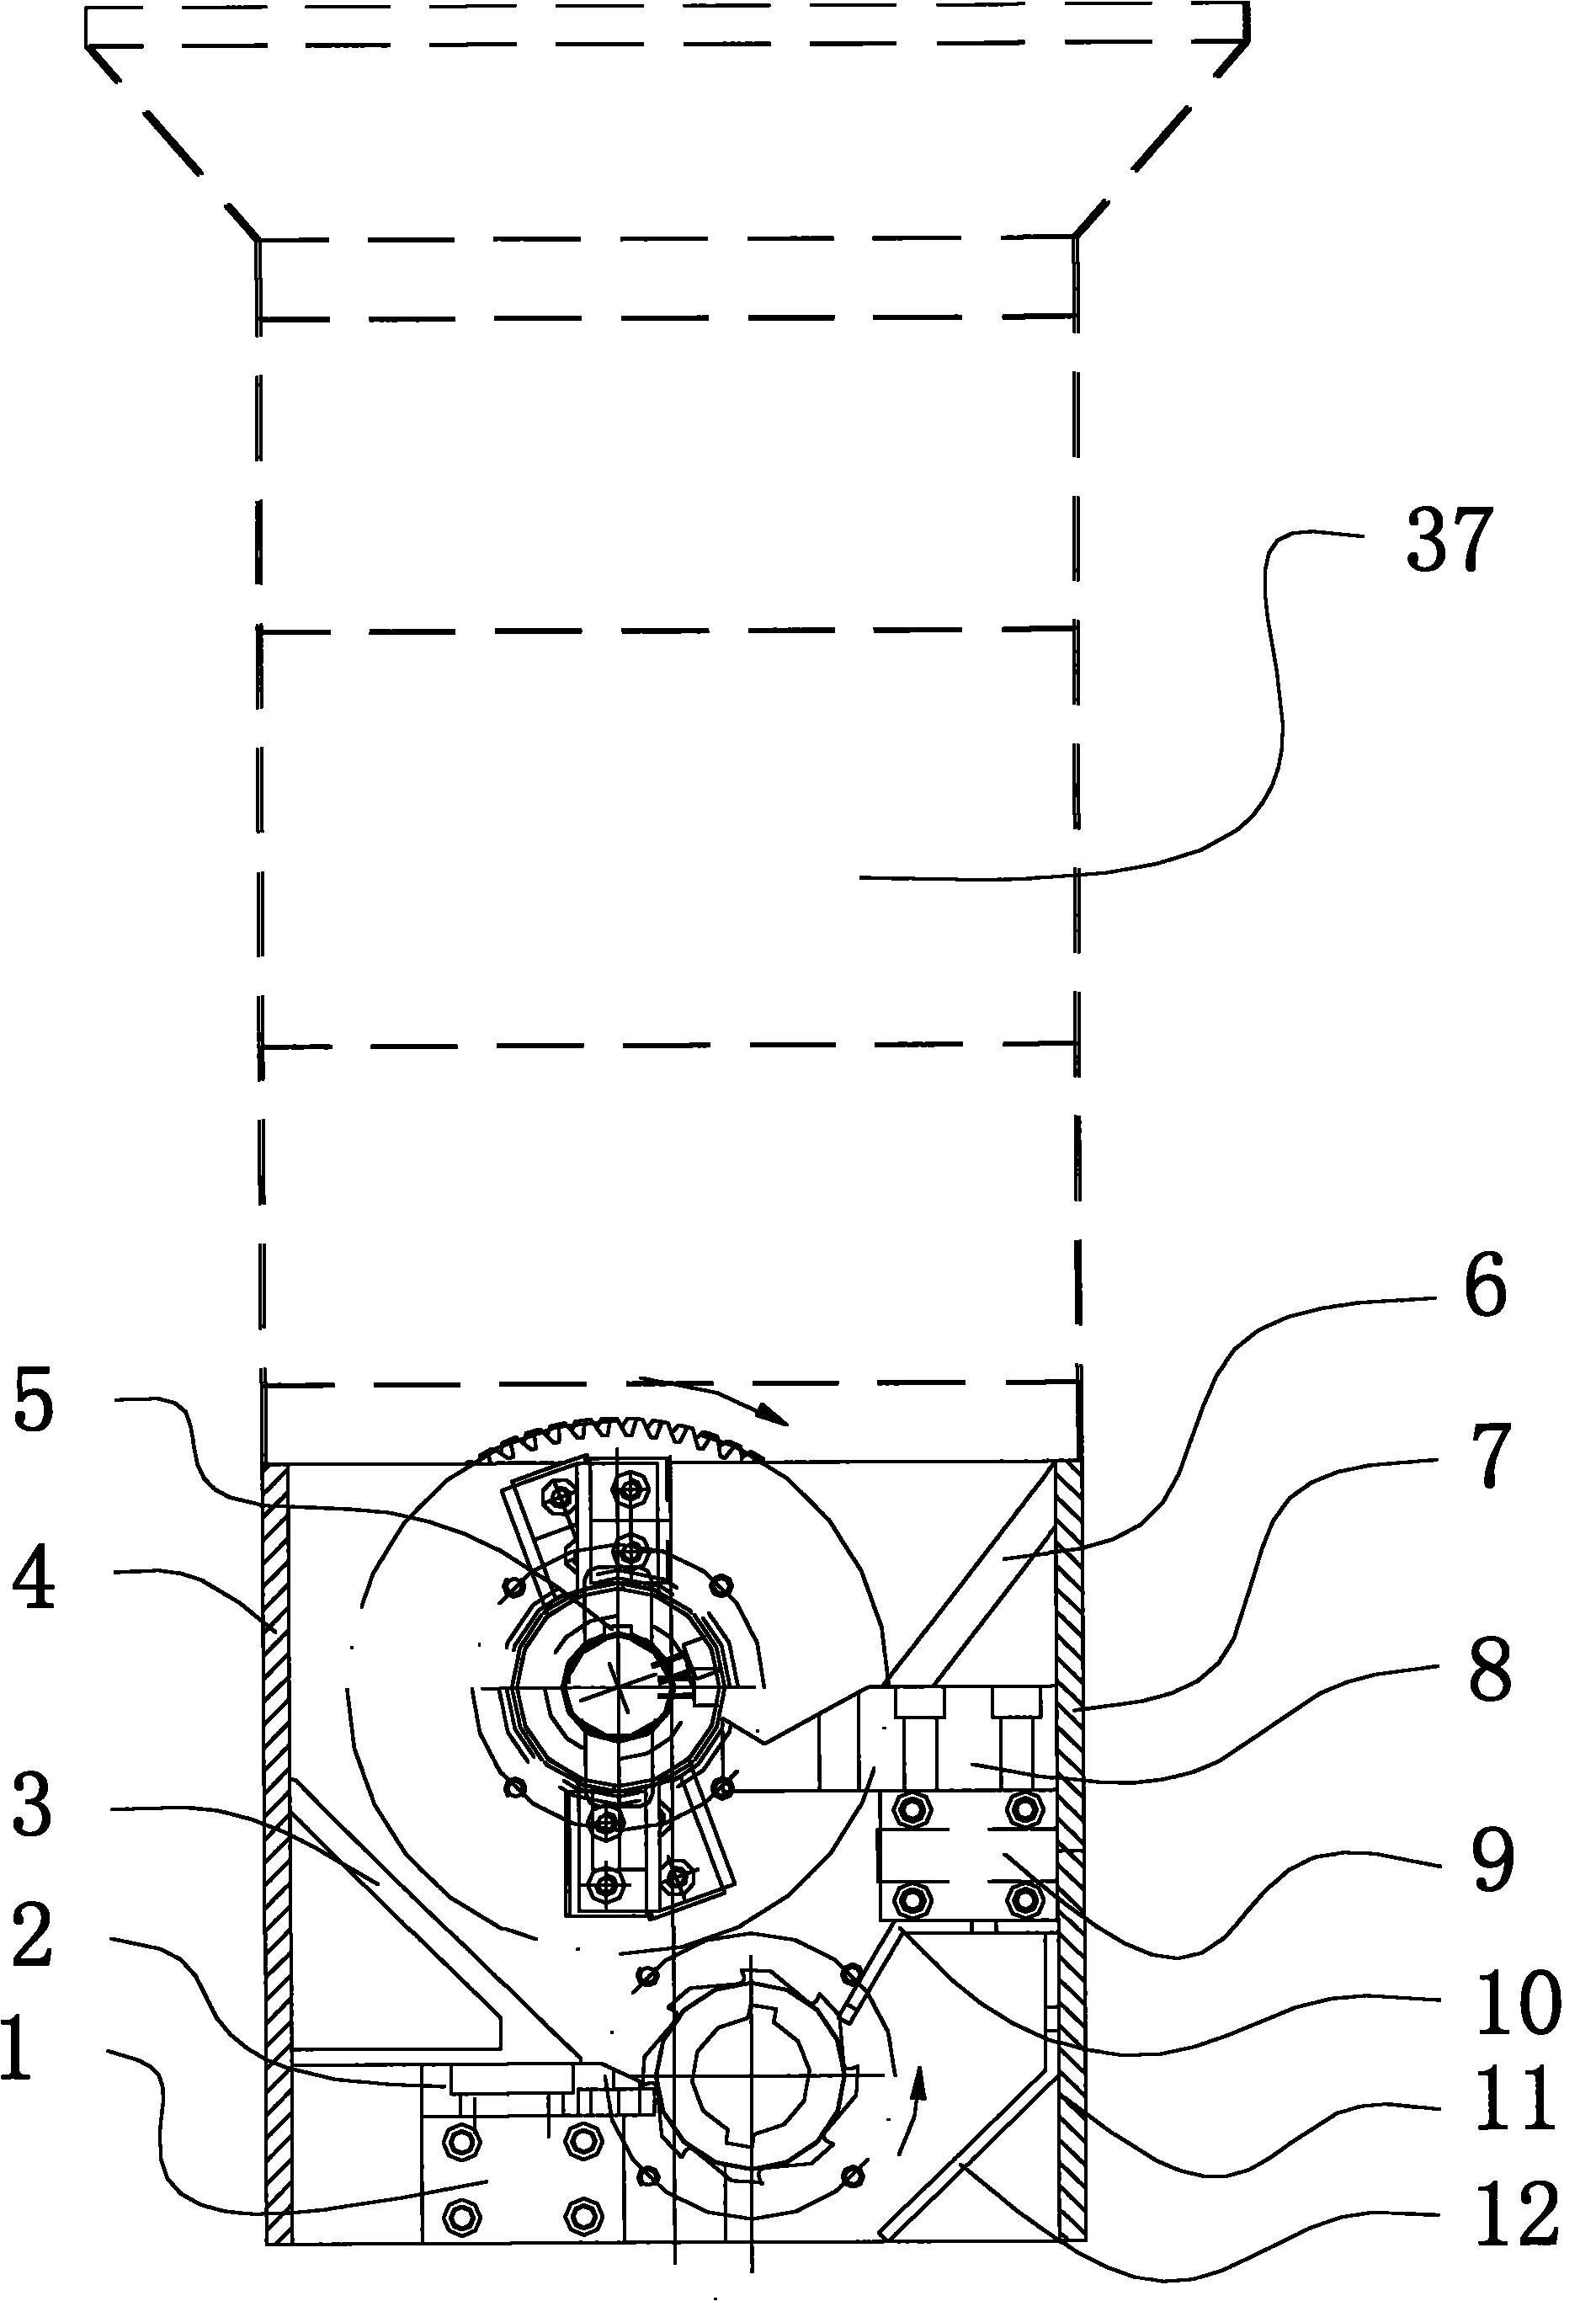 Double-layer grinder